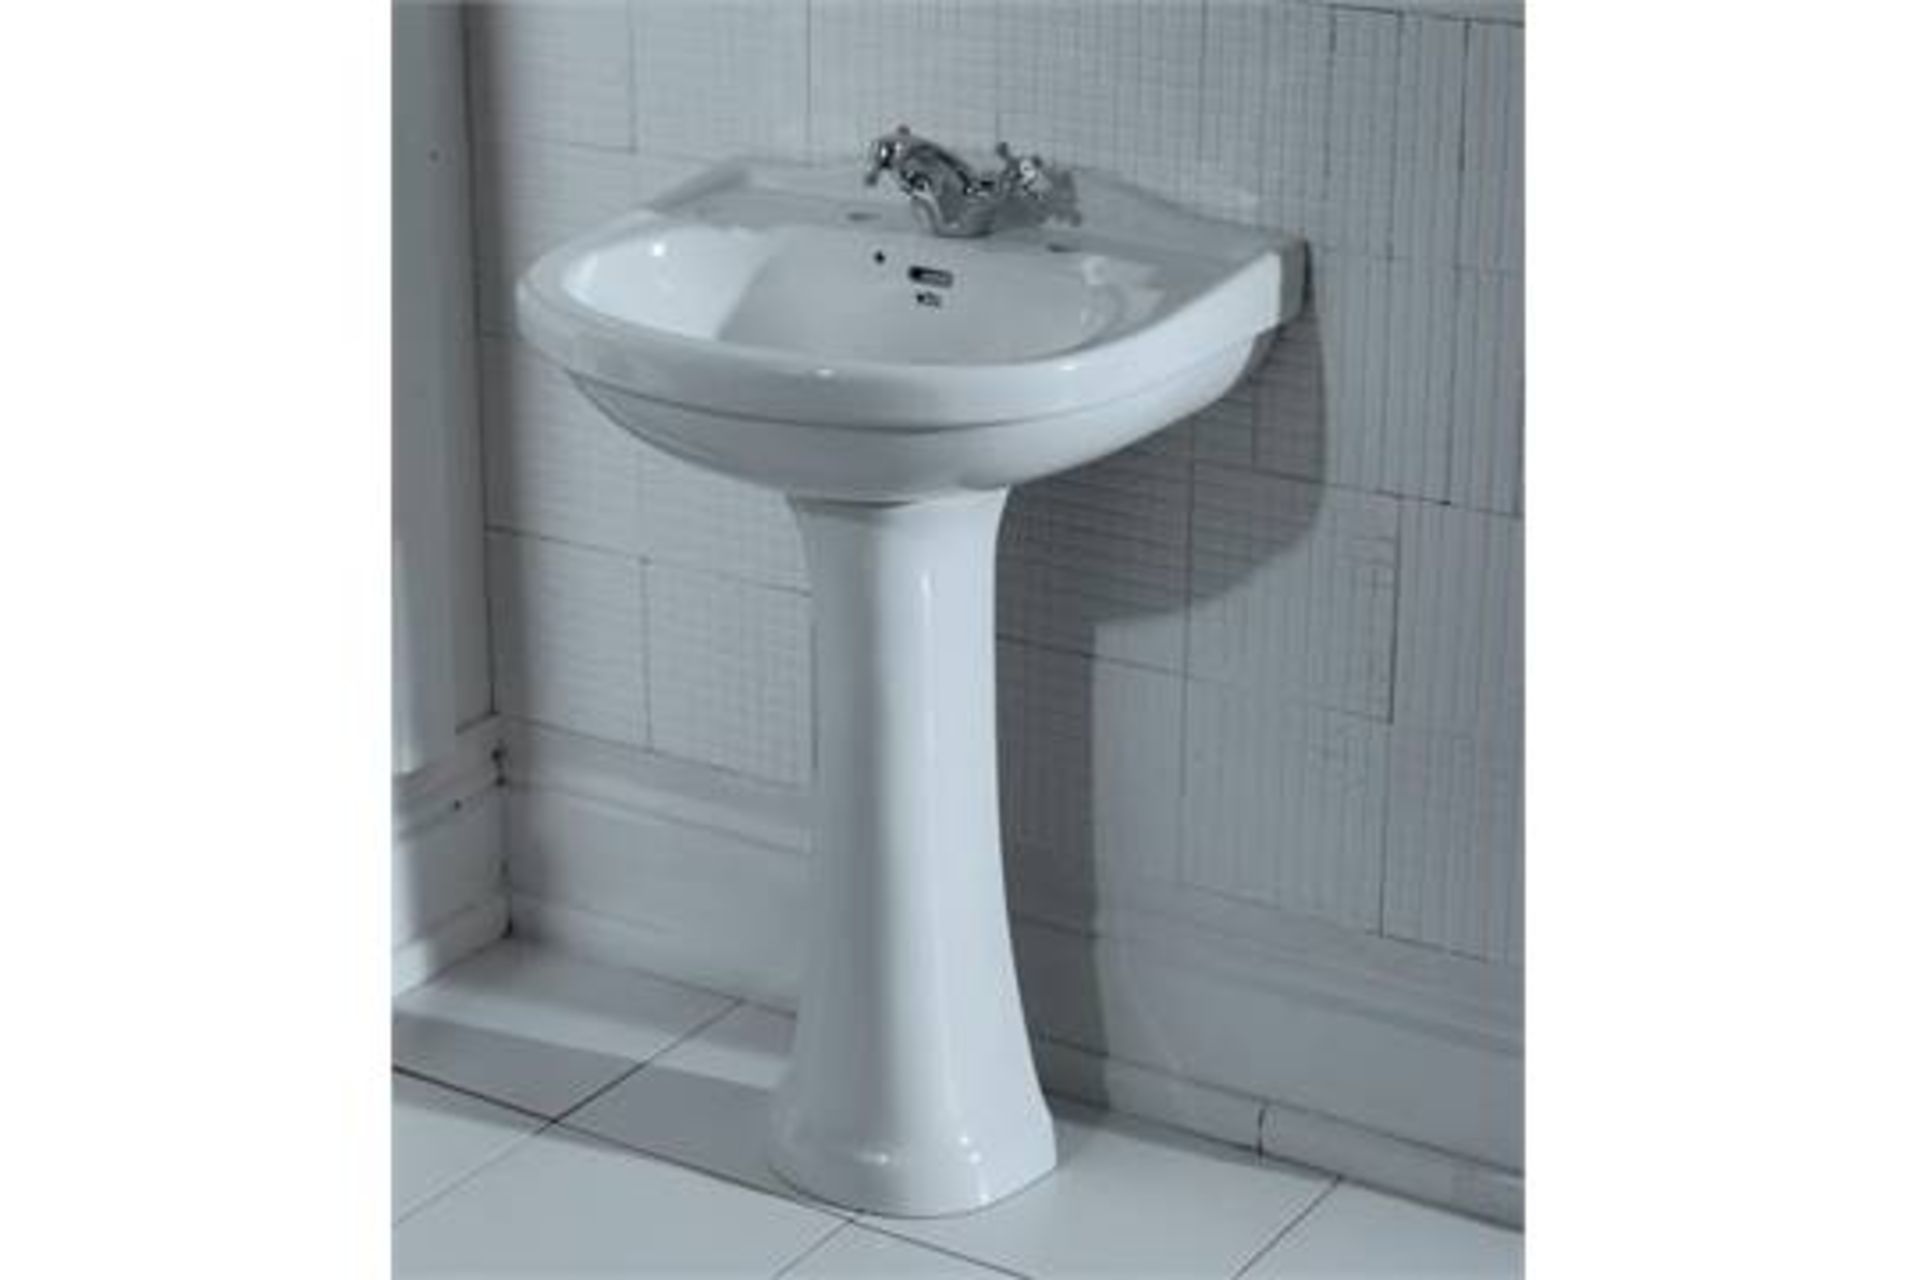 20 x Vogue Bathrooms CARLTON Two Tap Hole SINK BASINS With Pedestals - 550mm Width - Brand New Boxed